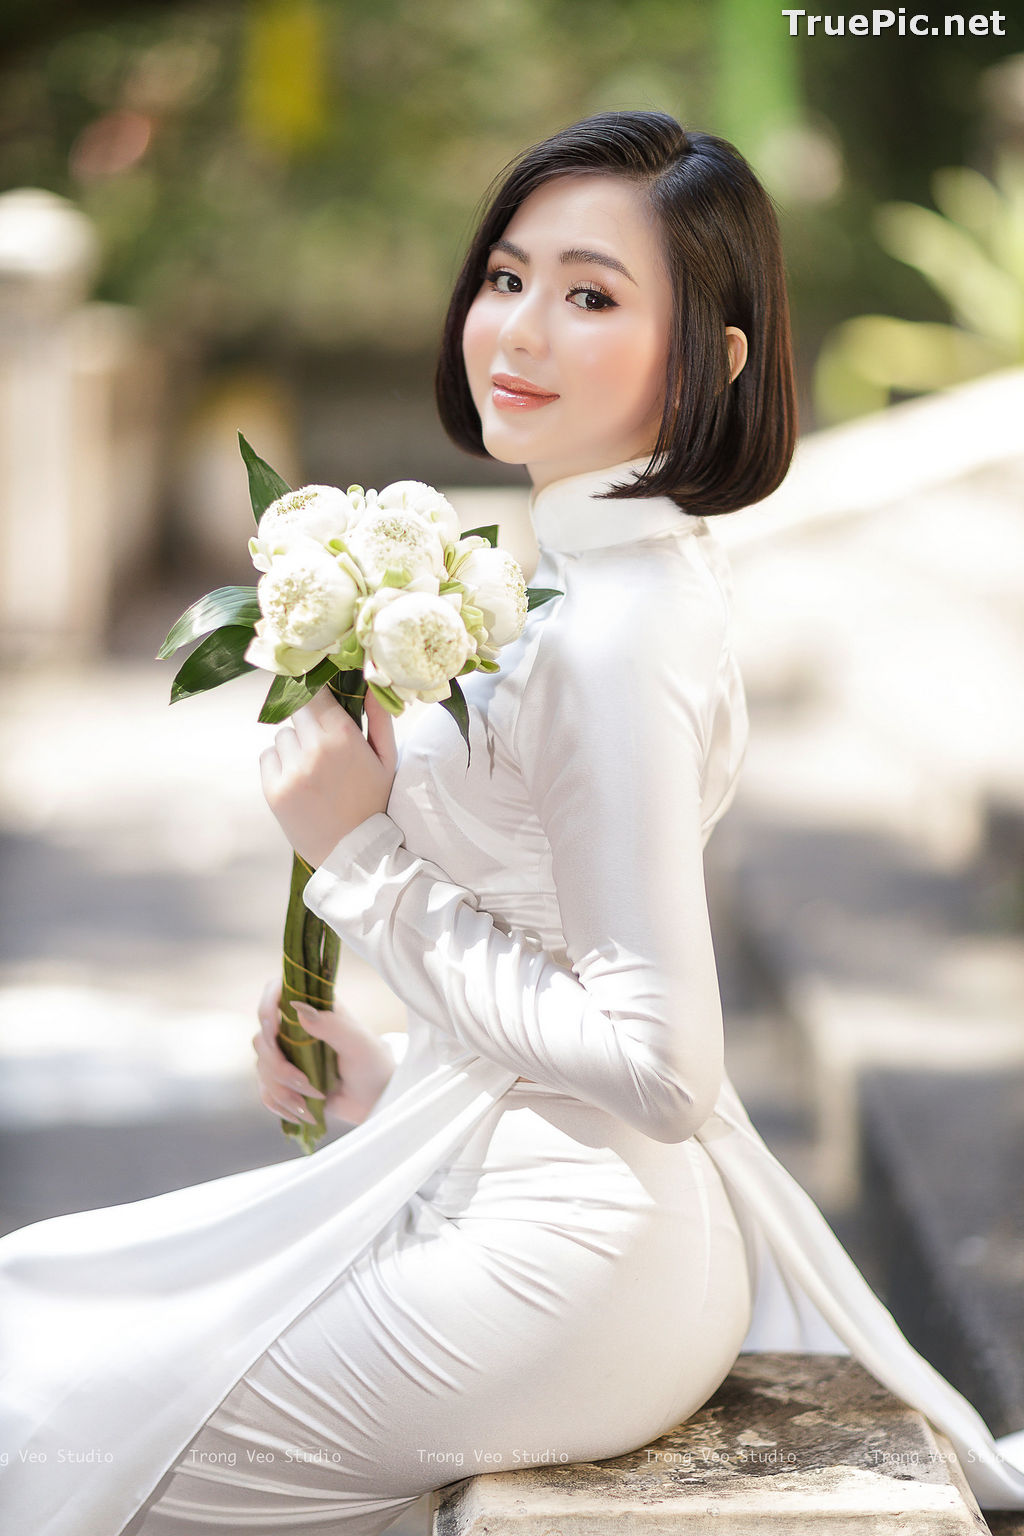 Image The Beauty of Vietnamese Girls with Traditional Dress (Ao Dai) #2 - TruePic.net - Picture-79